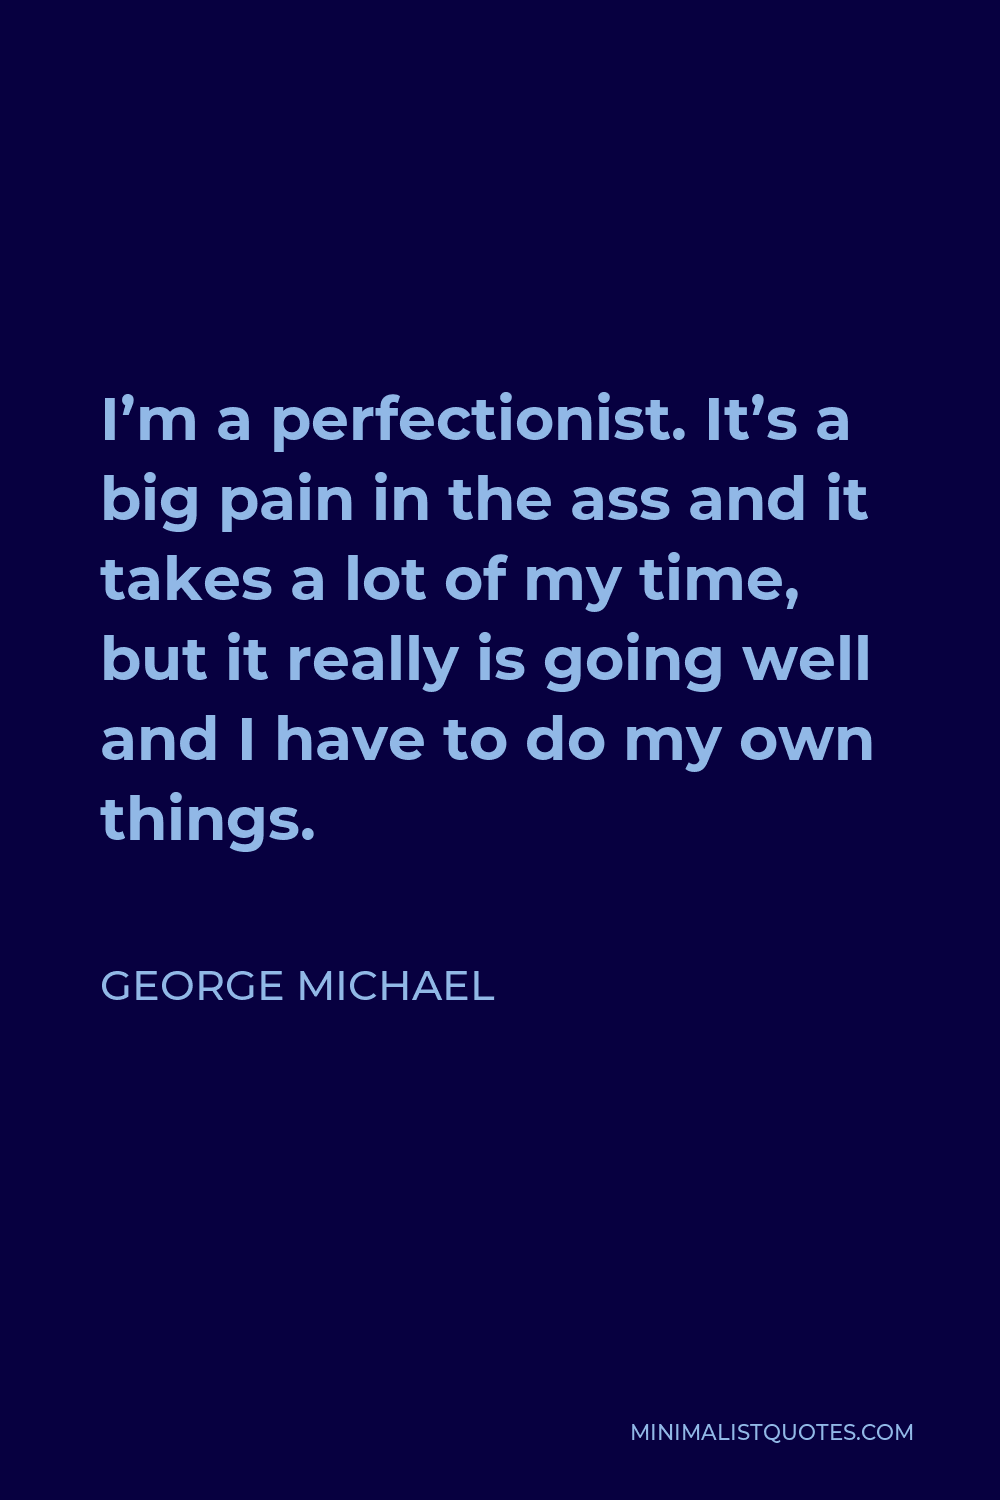 George Michael Quote - I’m a perfectionist. It’s a big pain in the ass and it takes a lot of my time, but it really is going well and I have to do my own things.